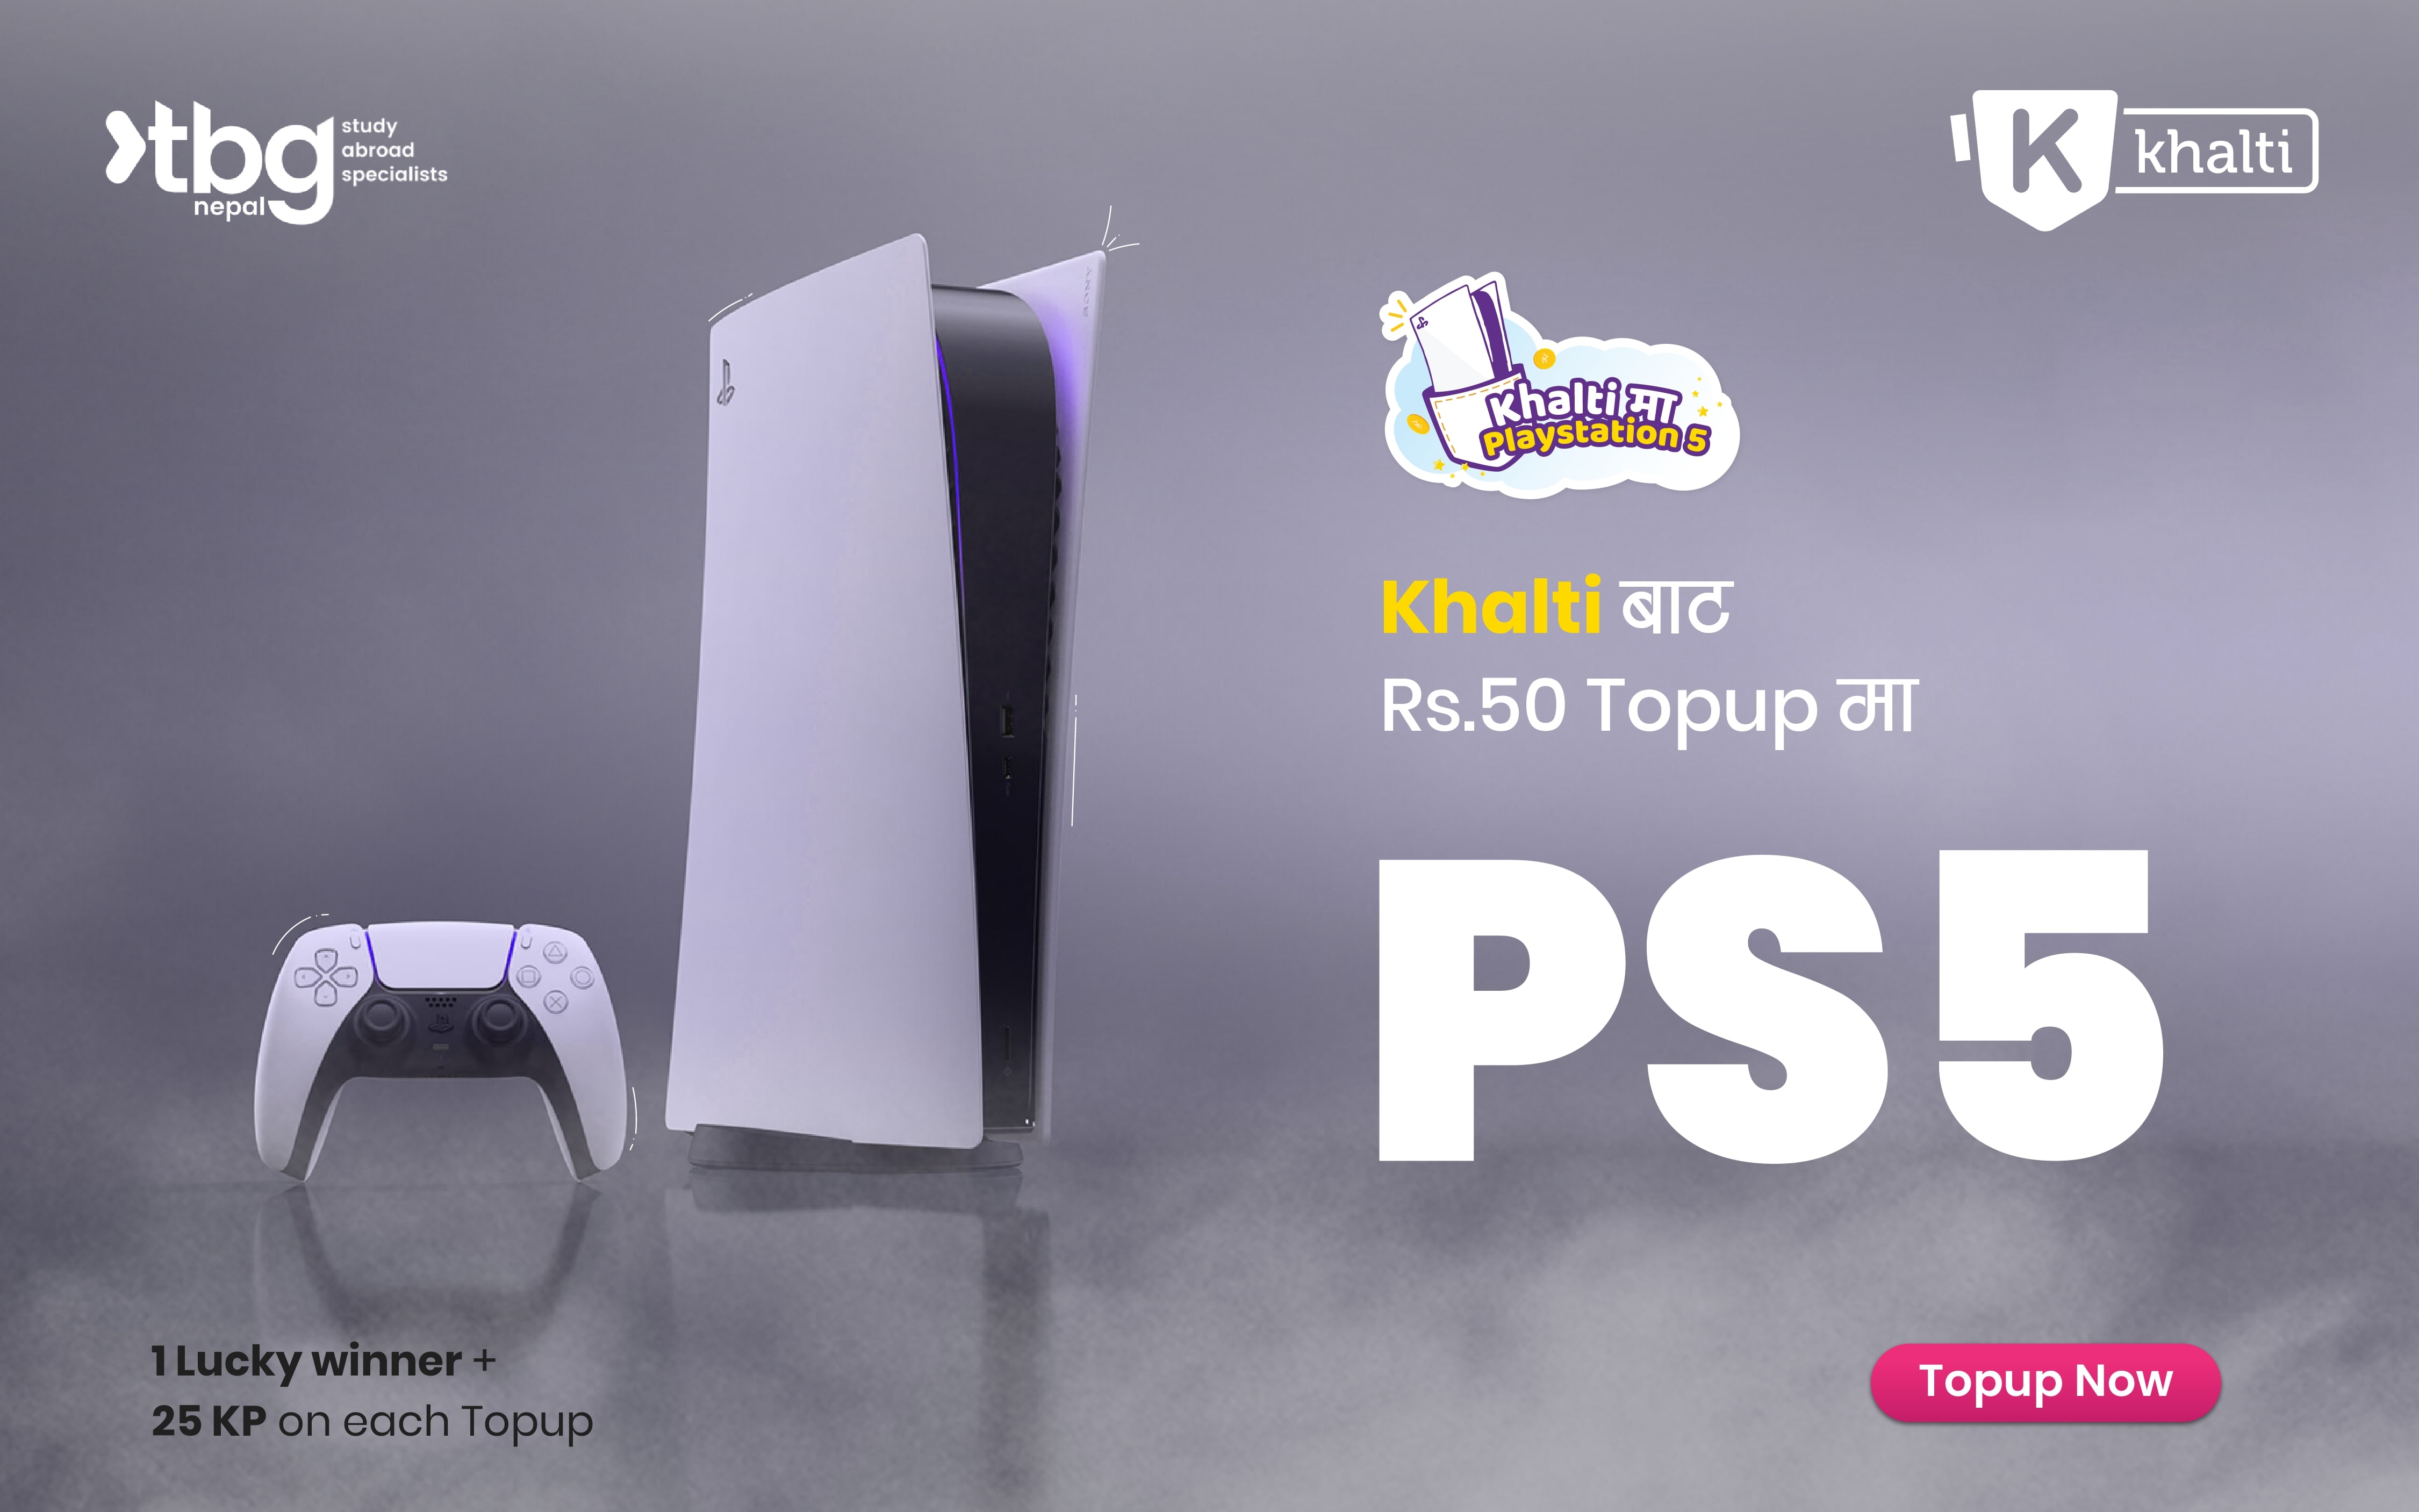 Top-Up from Khalti - Get a chance to win PS5